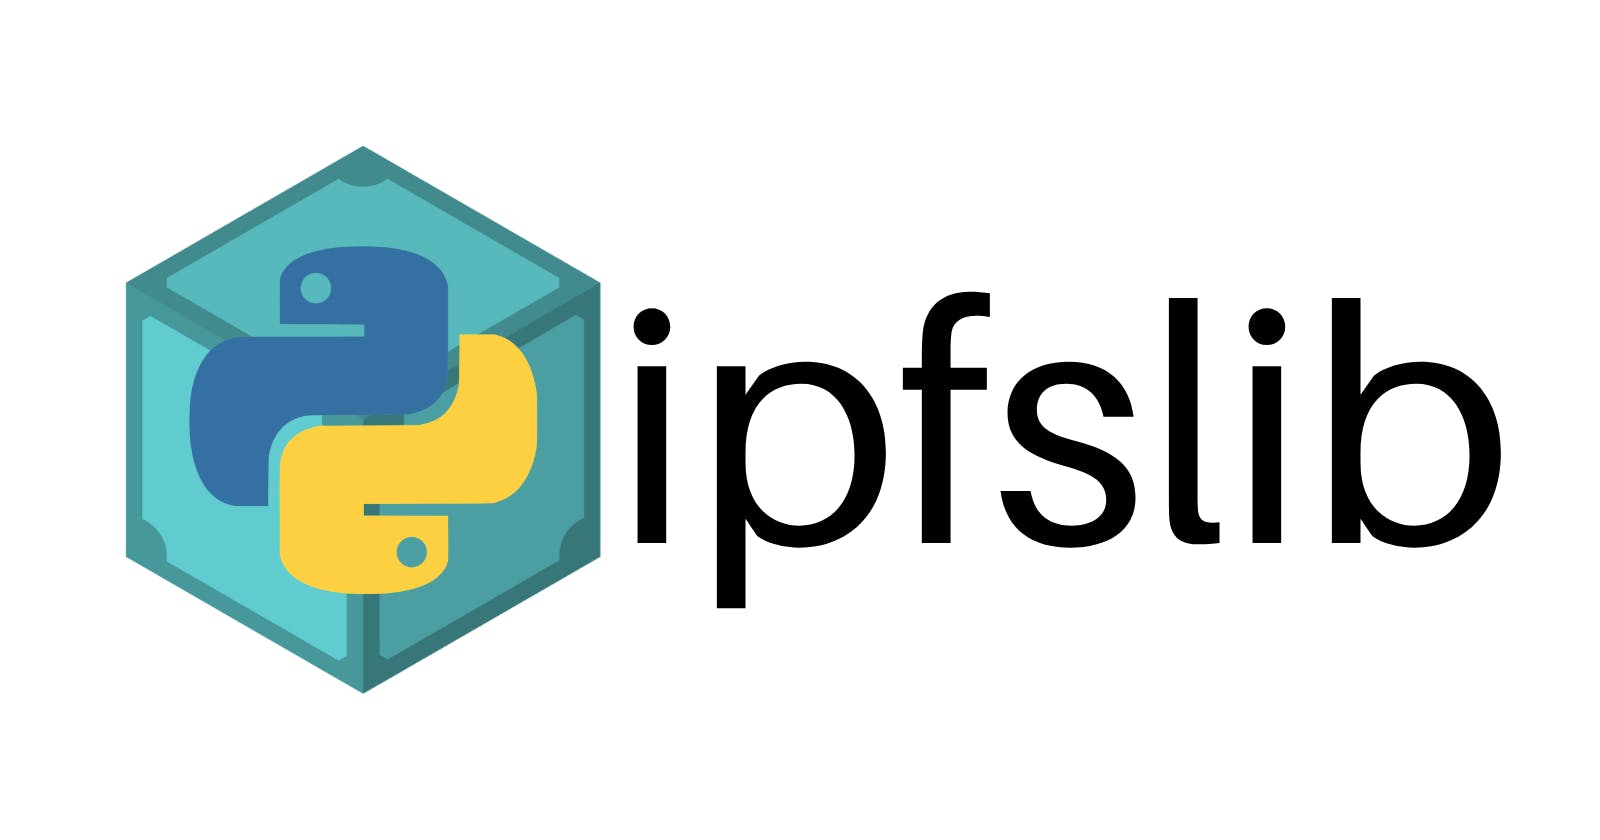 Making a Python wrapper for IPFS